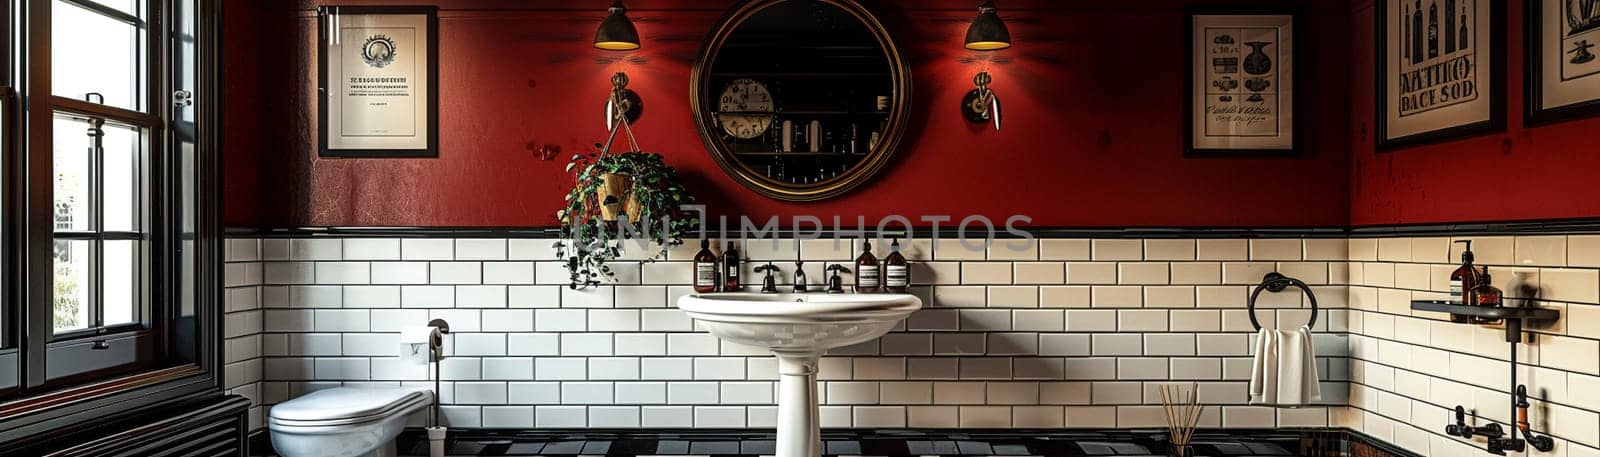 Vintage Hollywood glam powder room with mirrored vanity and black-and-white tile.3D render.